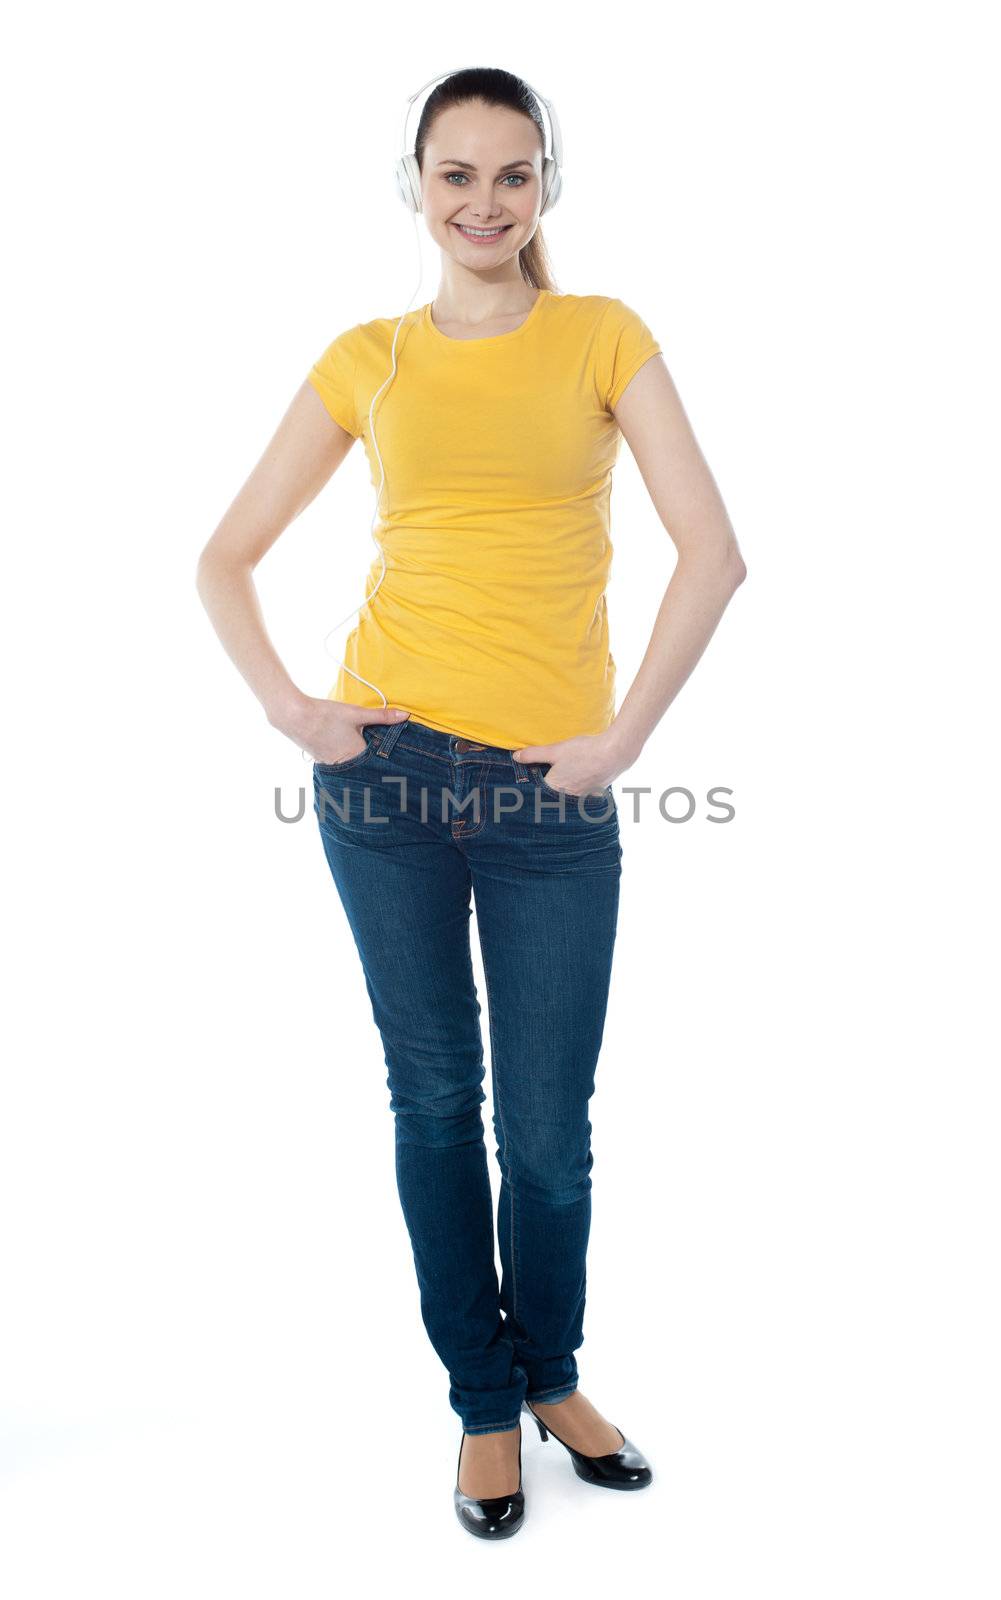 Portrait of a cute young girl standing with hands in pocket over white background